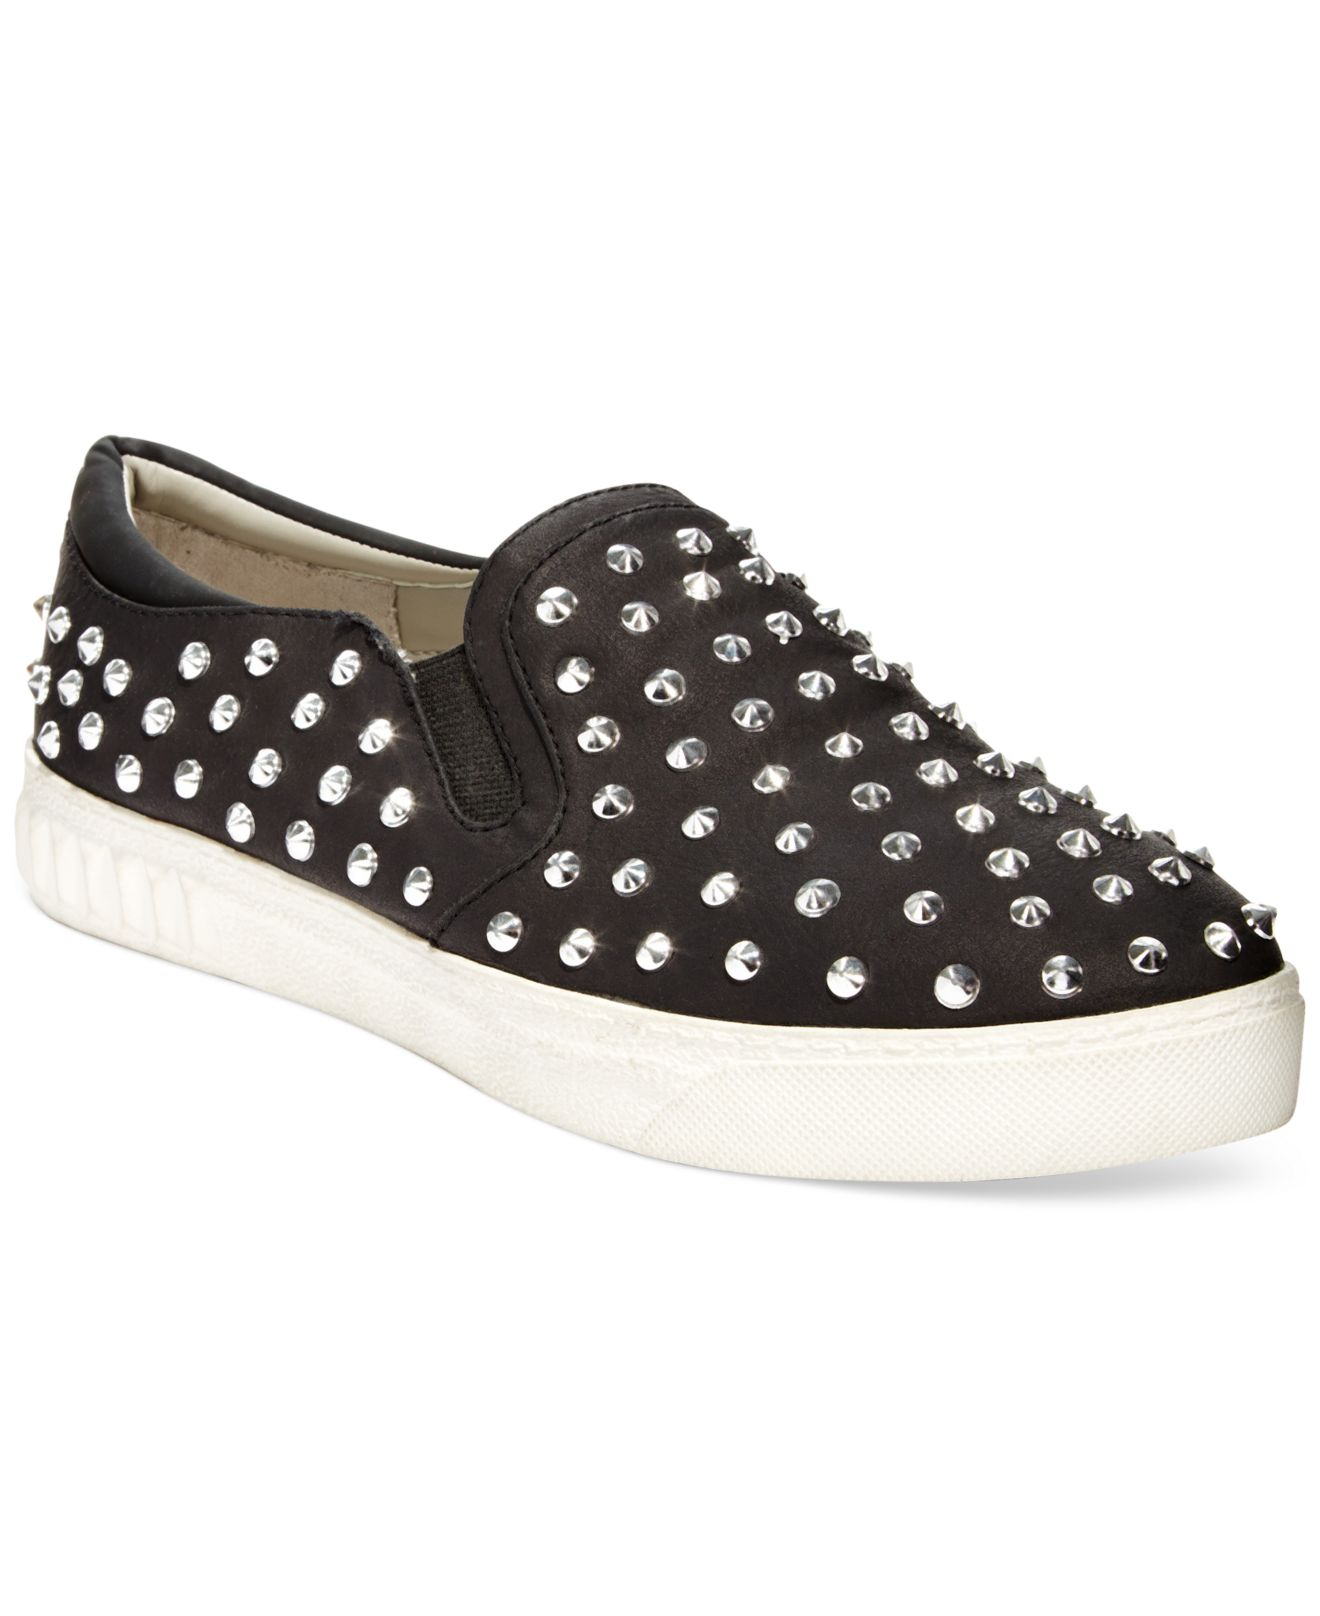 Circus by Sam Edelman Carlson Studded Slip On Sneakers in Black | Lyst